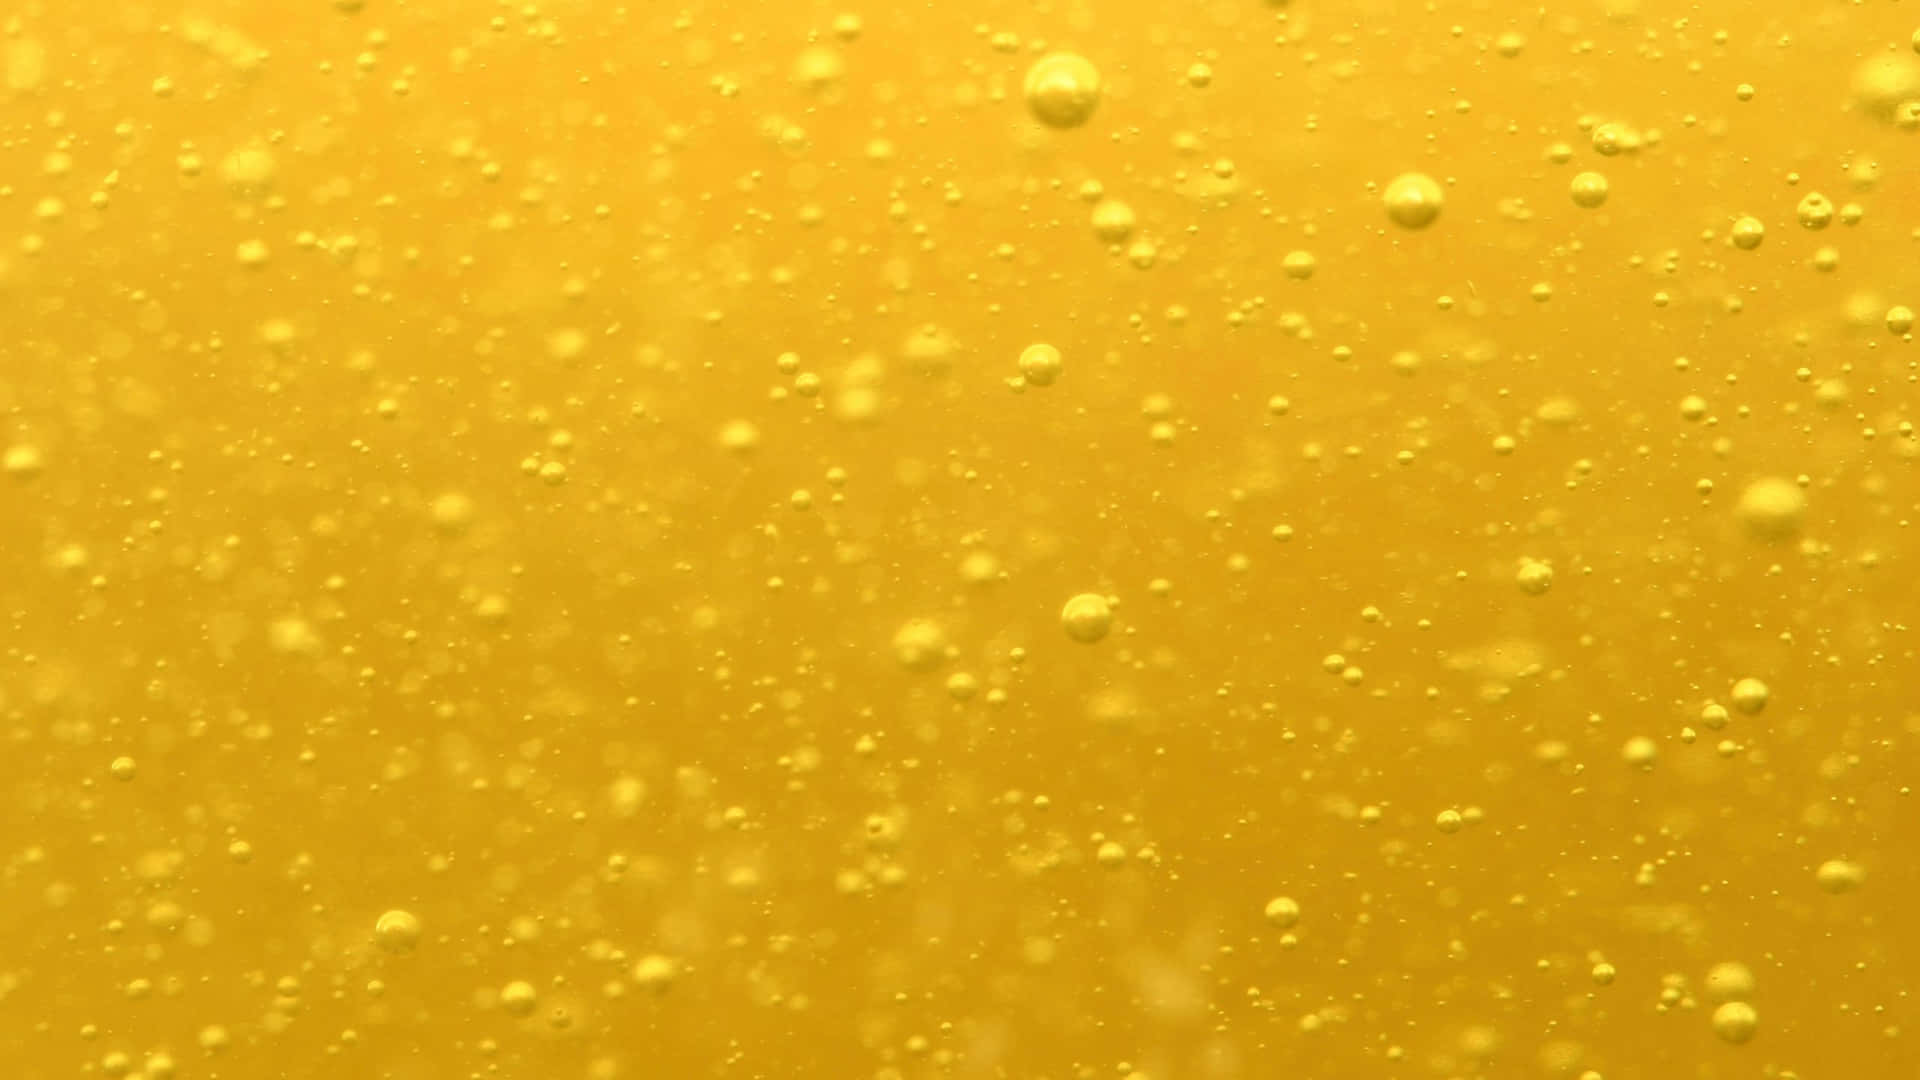 A Close Up Of A Yellow Beer Glass With Water Droplets